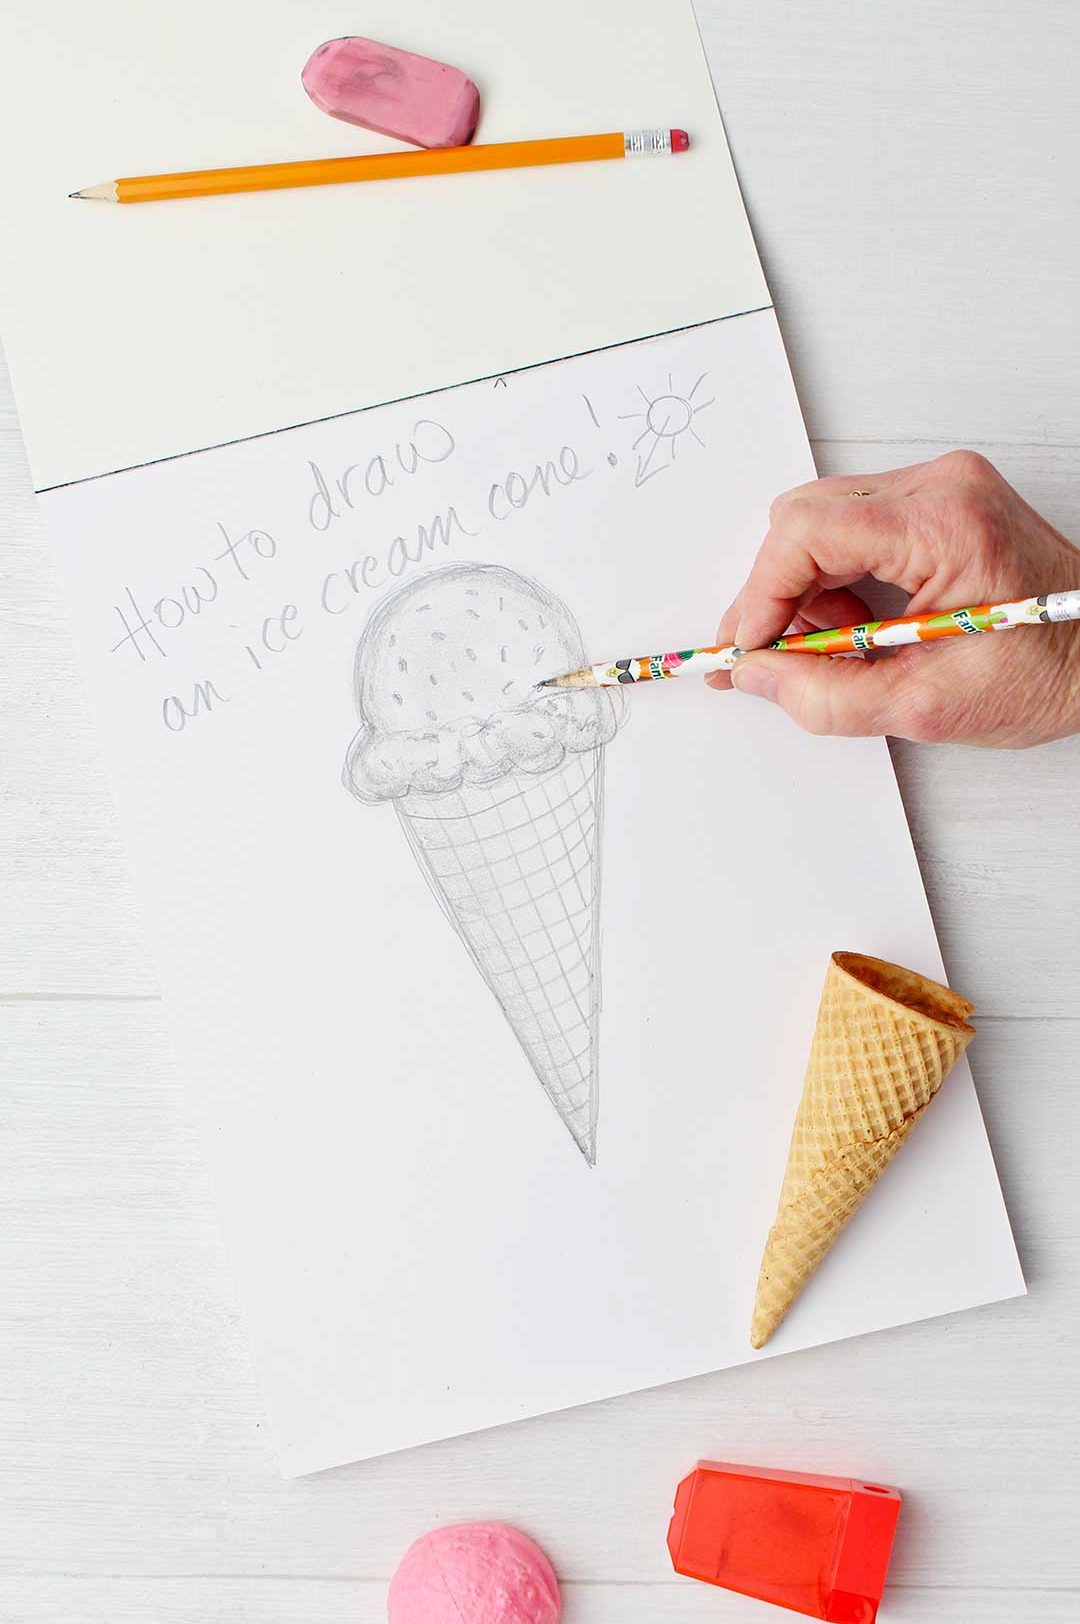 Hand sketching final touches of sprinkles on ice cream cone sketch.